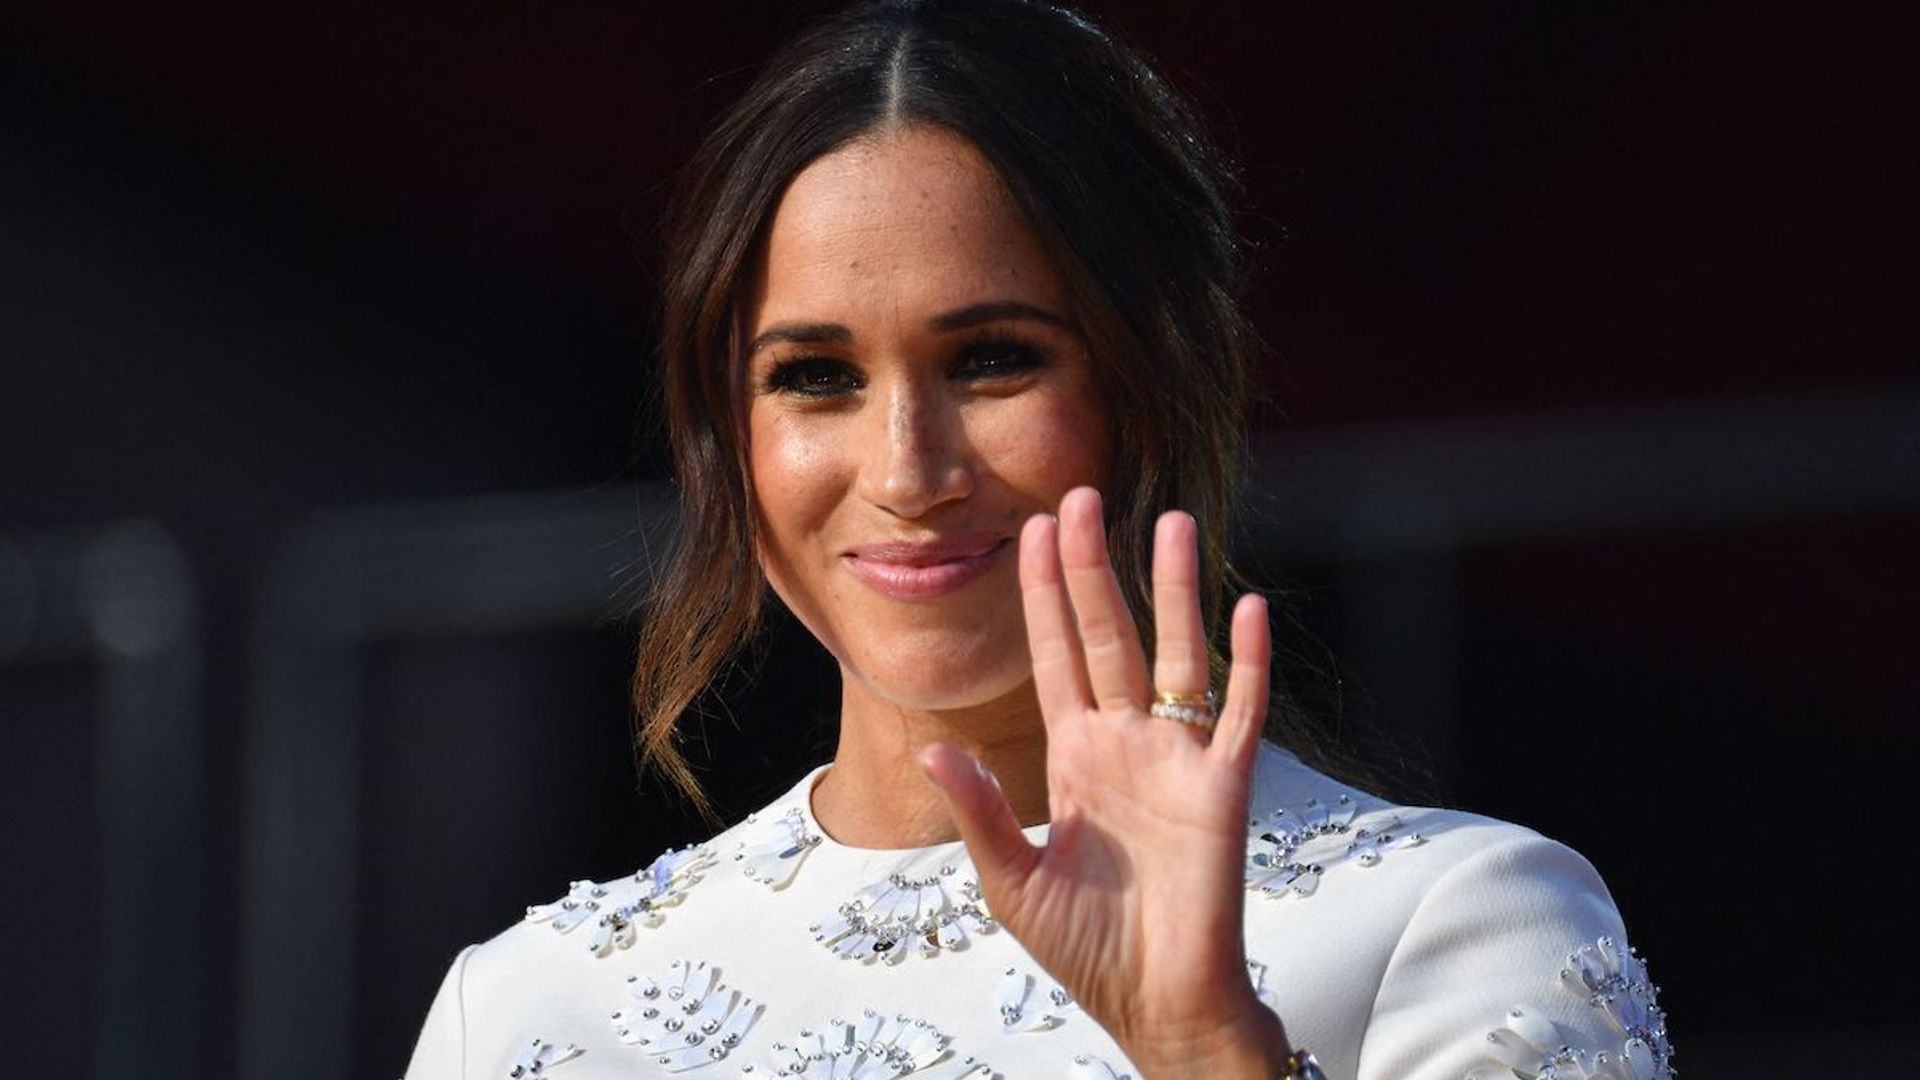 Meghan Markle adds sparkling diamond ring to her wedding stack - did you spot it?